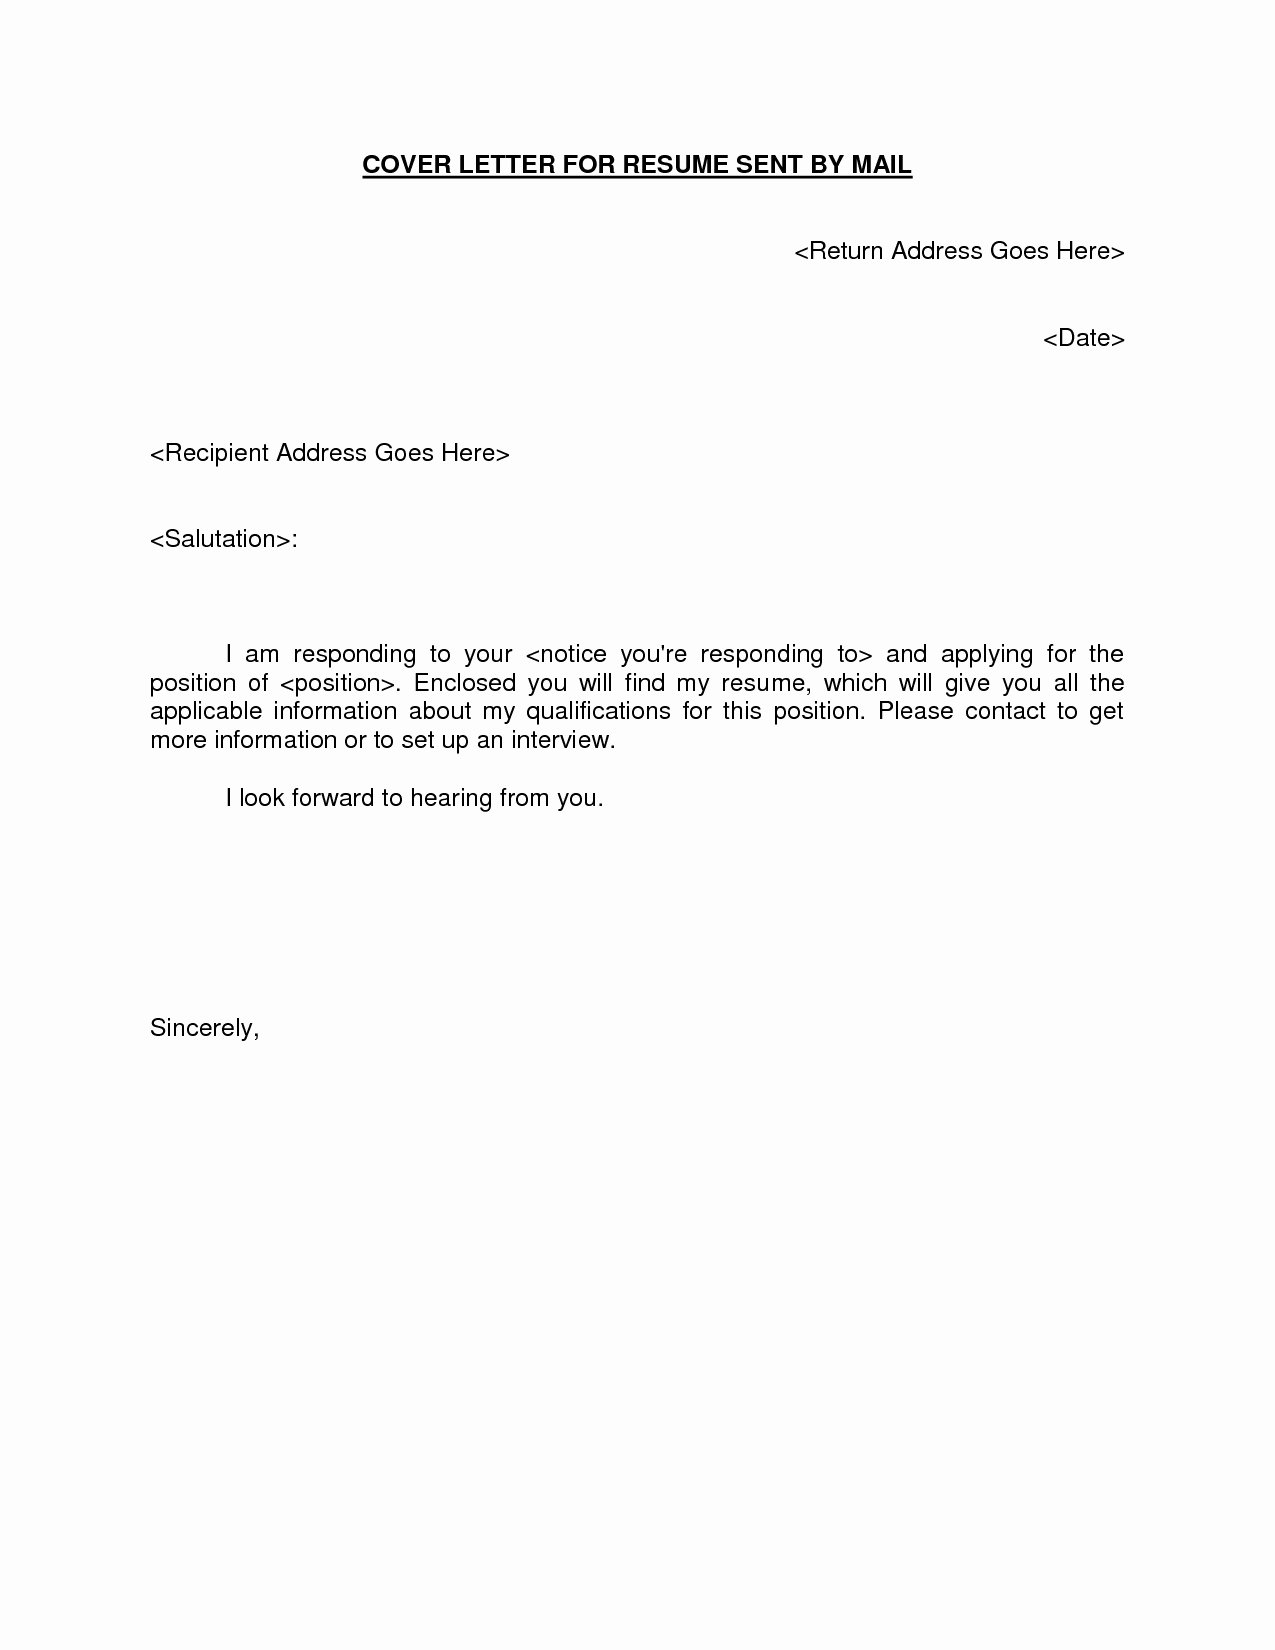 Email Resume Cover Letter Template